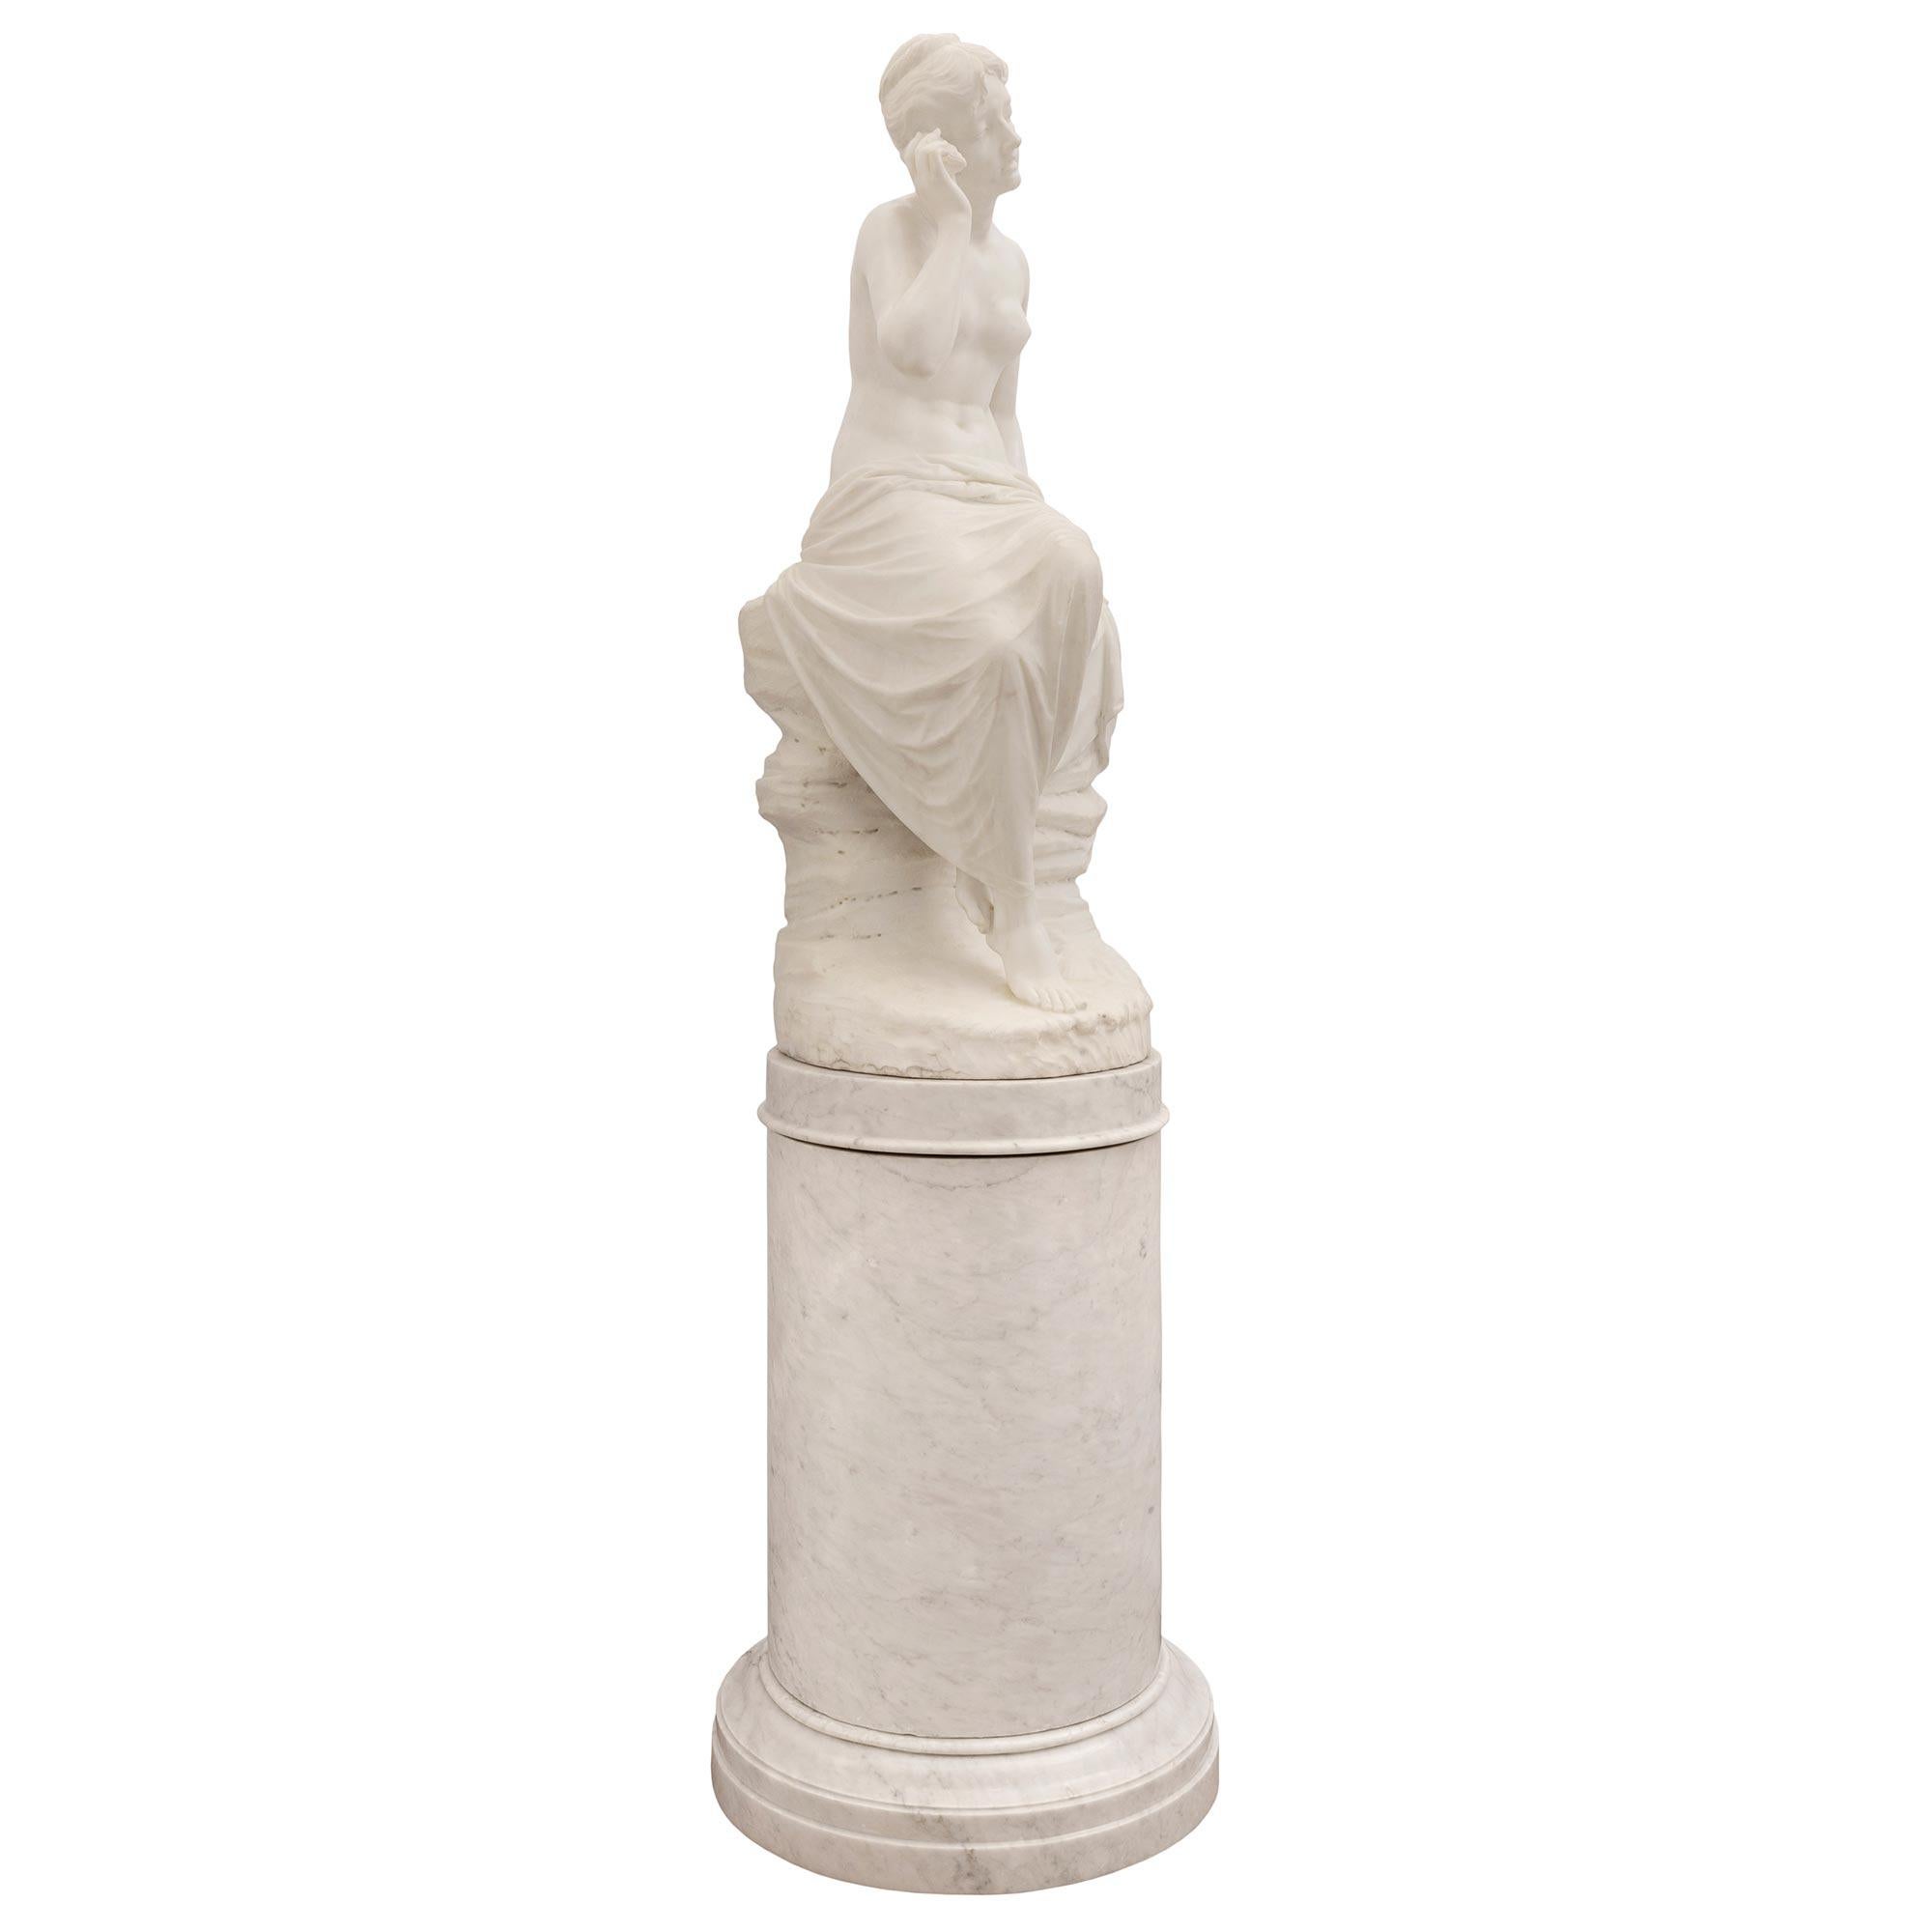 A stunning museum quality Italian 19th century white Carrara marble statue of a girl with a seashell on her original pedestal. The statue is raised by its original pedestal column with a fine mottled design at the base and an elegant richly chased